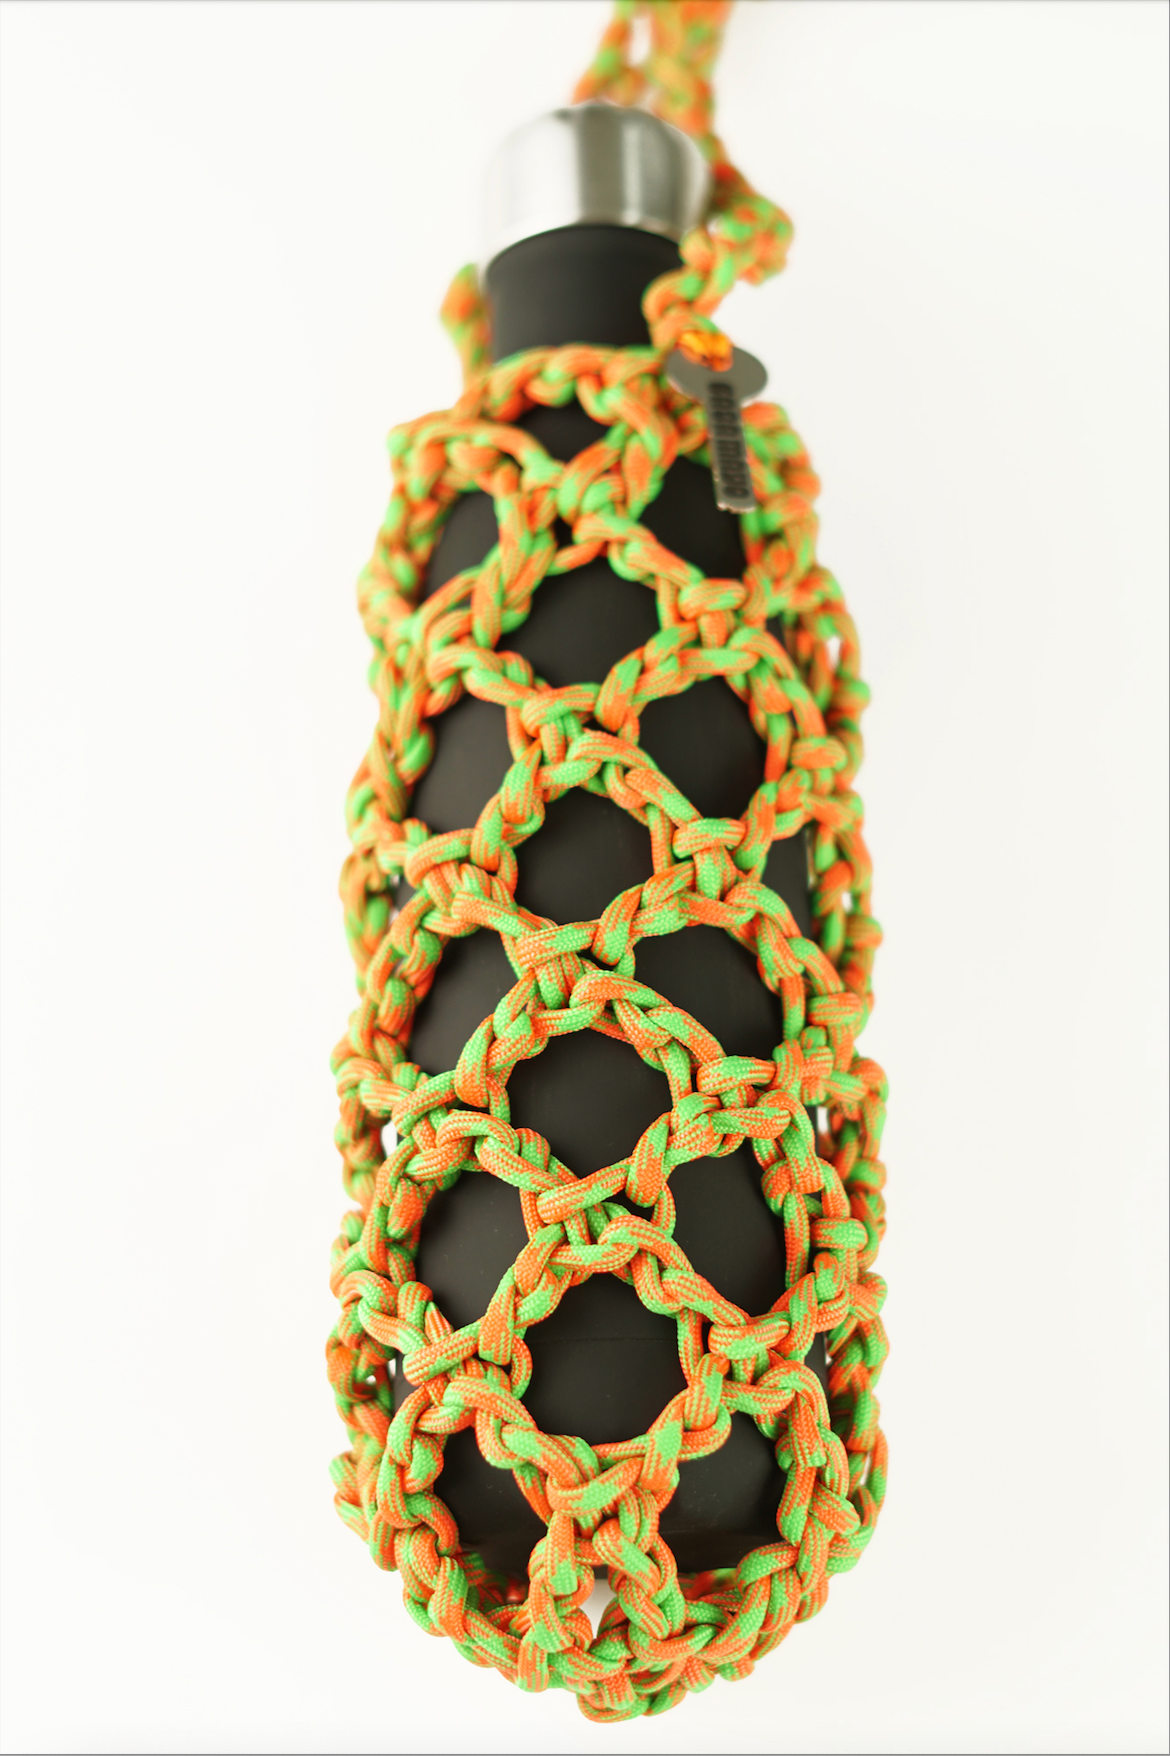 Green and orange bottle porter made of paracord rope